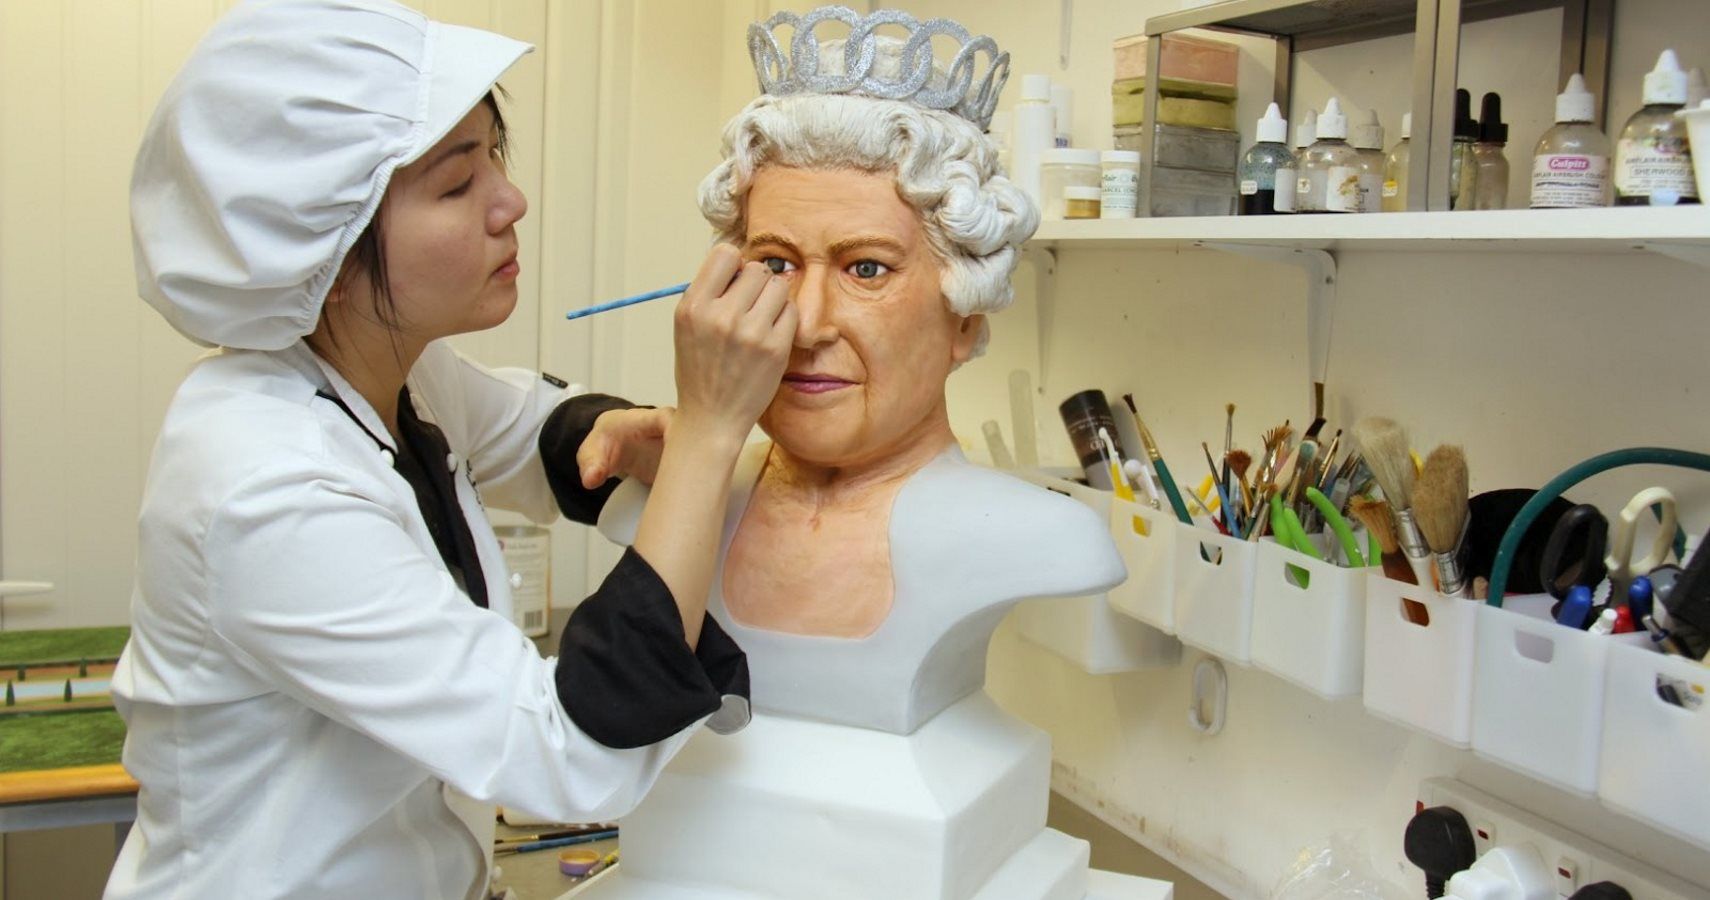 Queen Elizabeth Is Hiring A New Pastry Chef Who Must Have 'Good IT Skills'